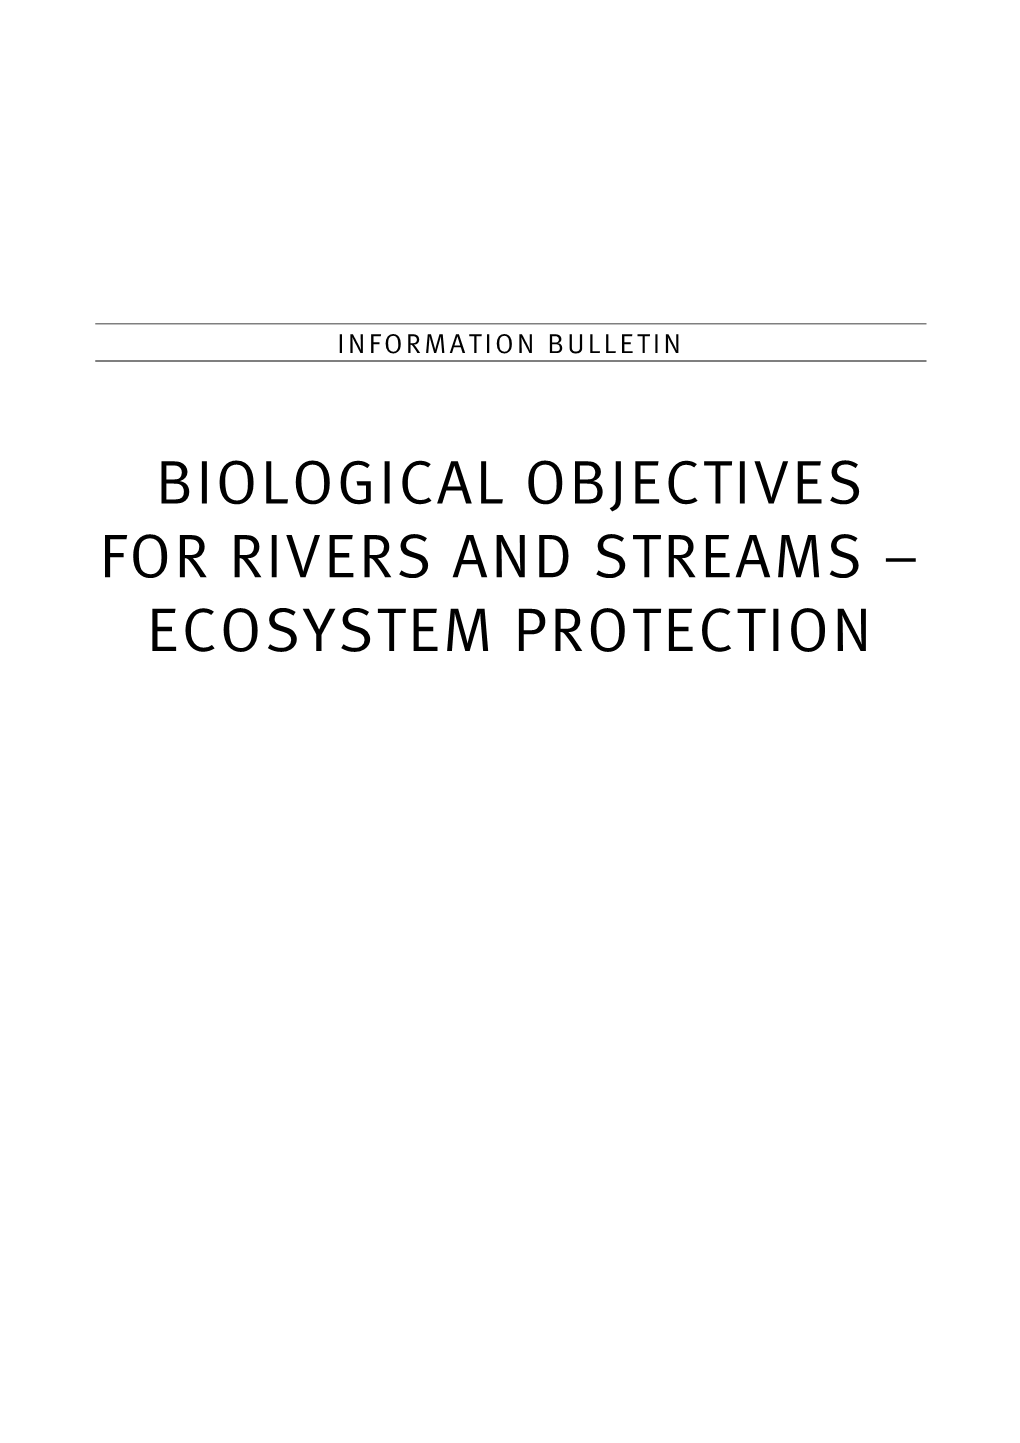 Biological Objectives for Rivers and Streams – Ecosystem Protection